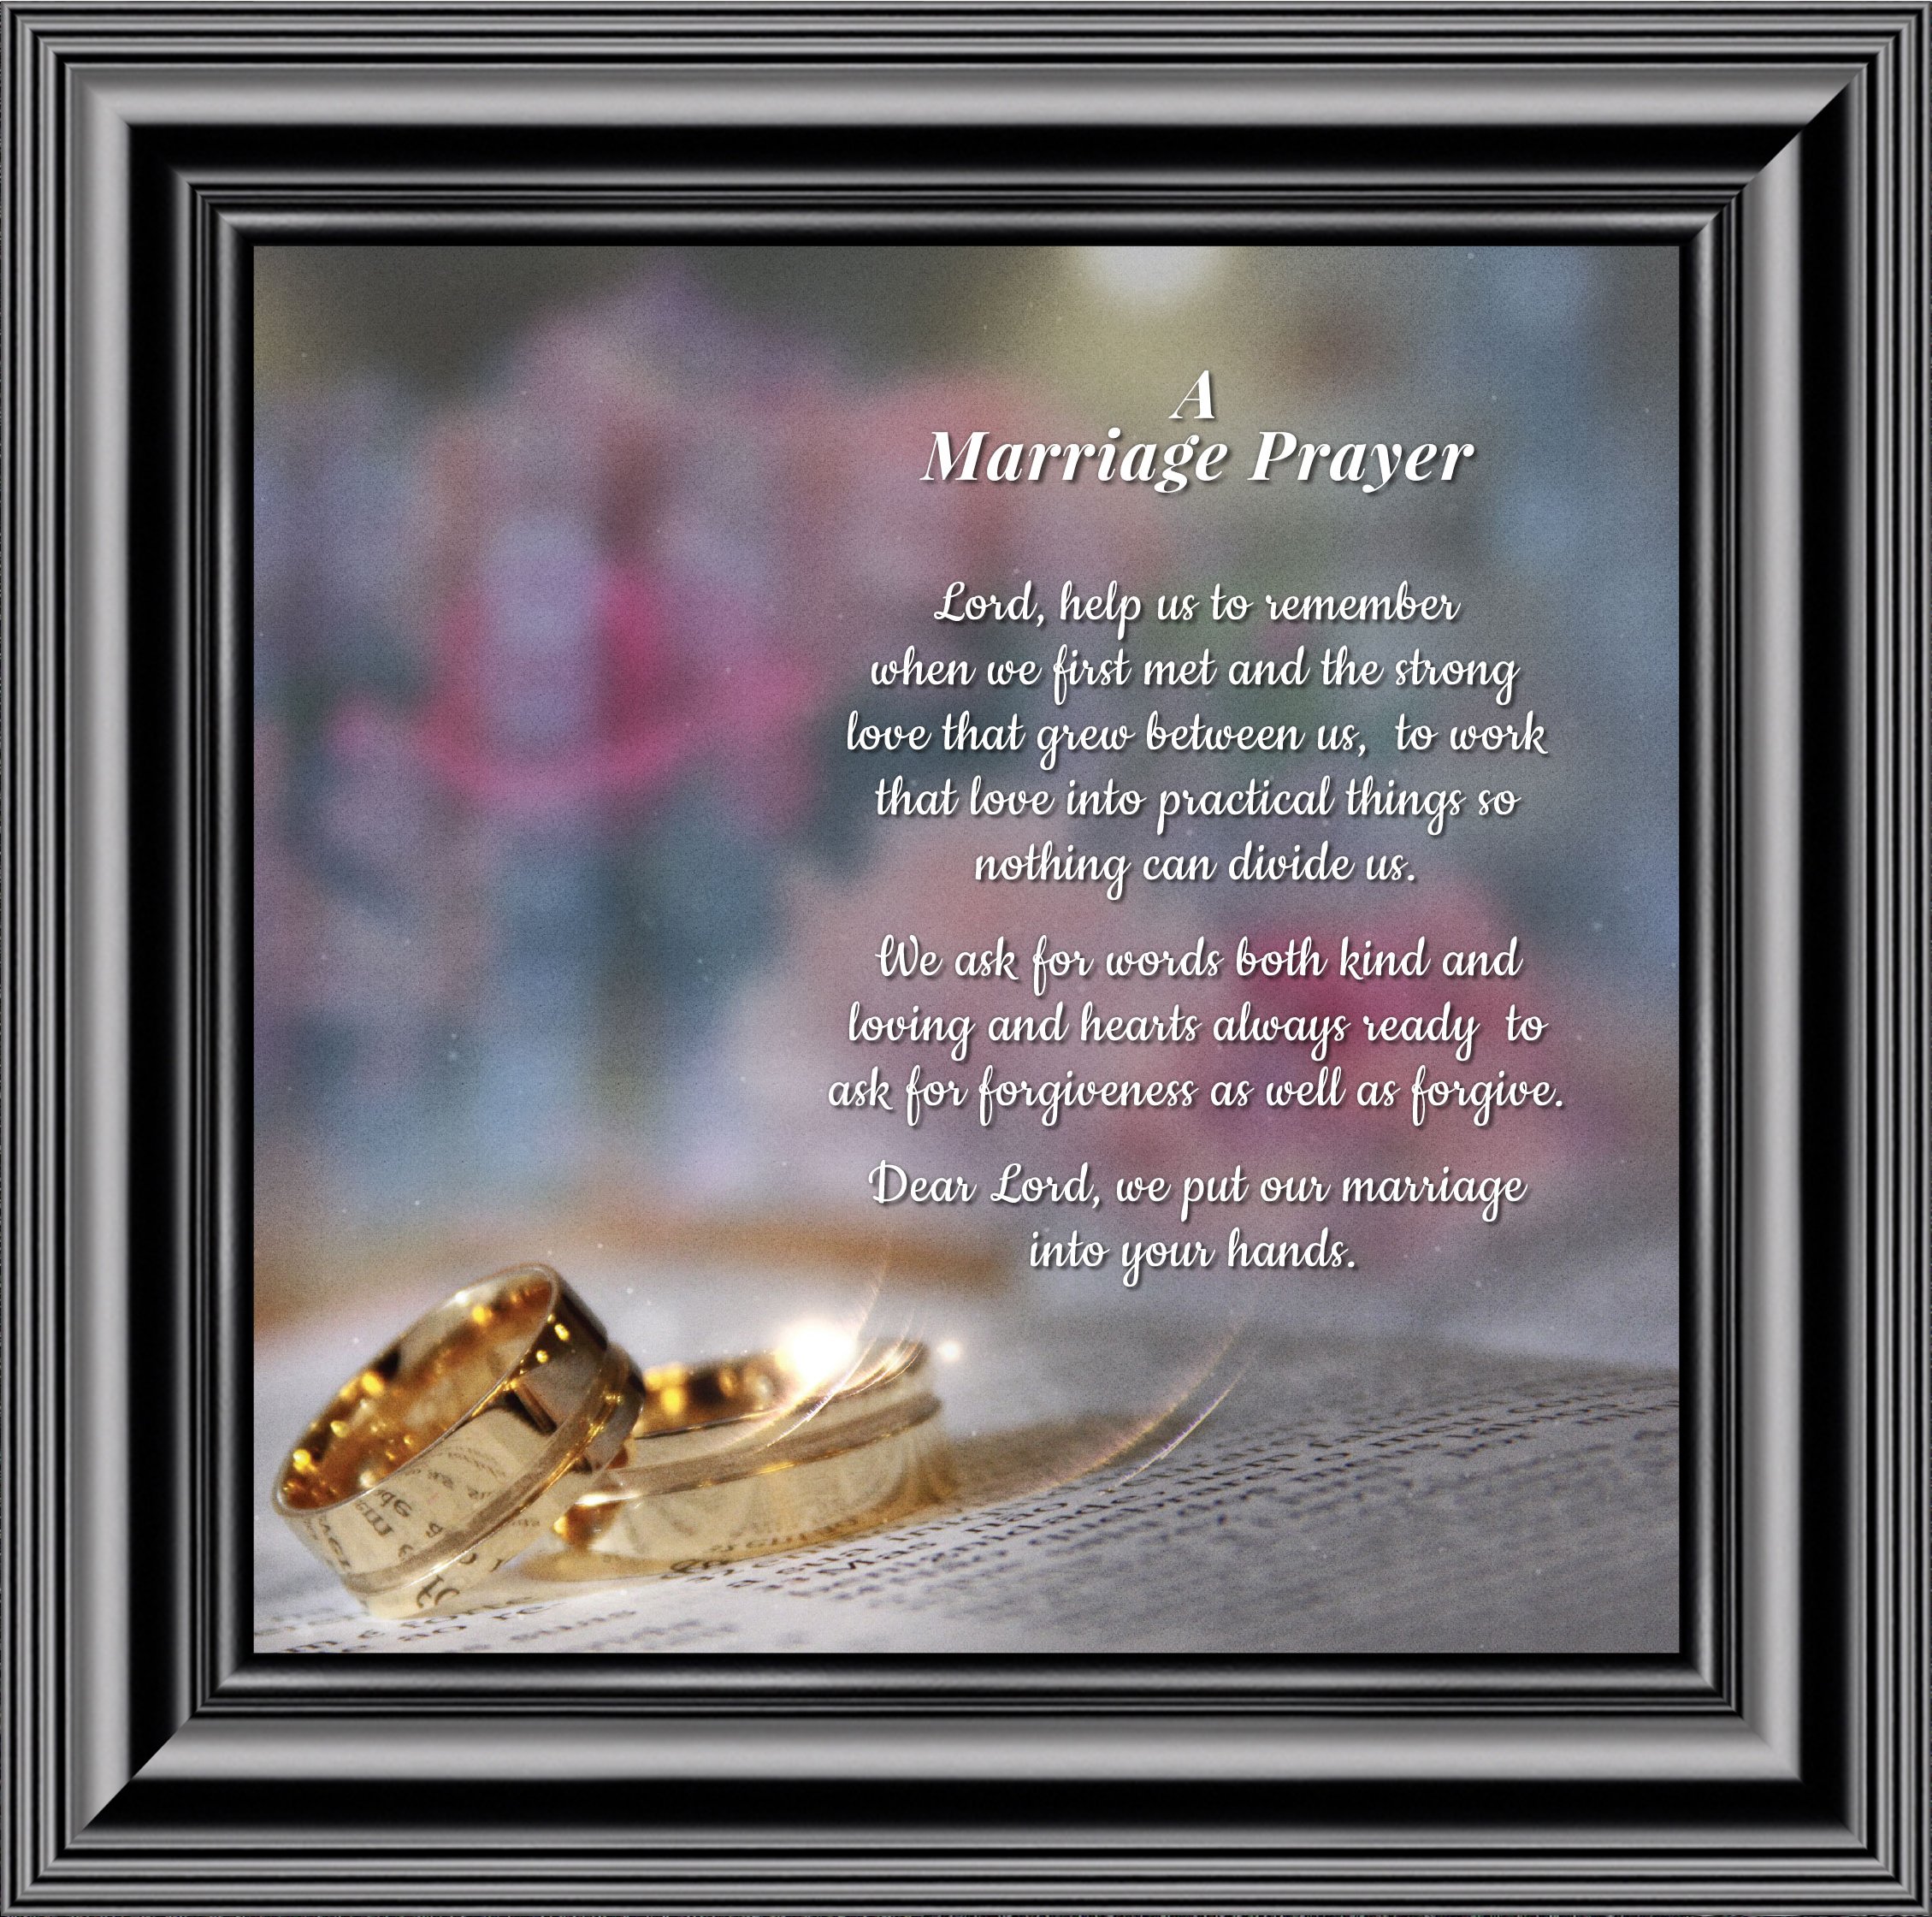 Framed Prayer for Your Marriage, Christian Wedding Gift for Bride and ...